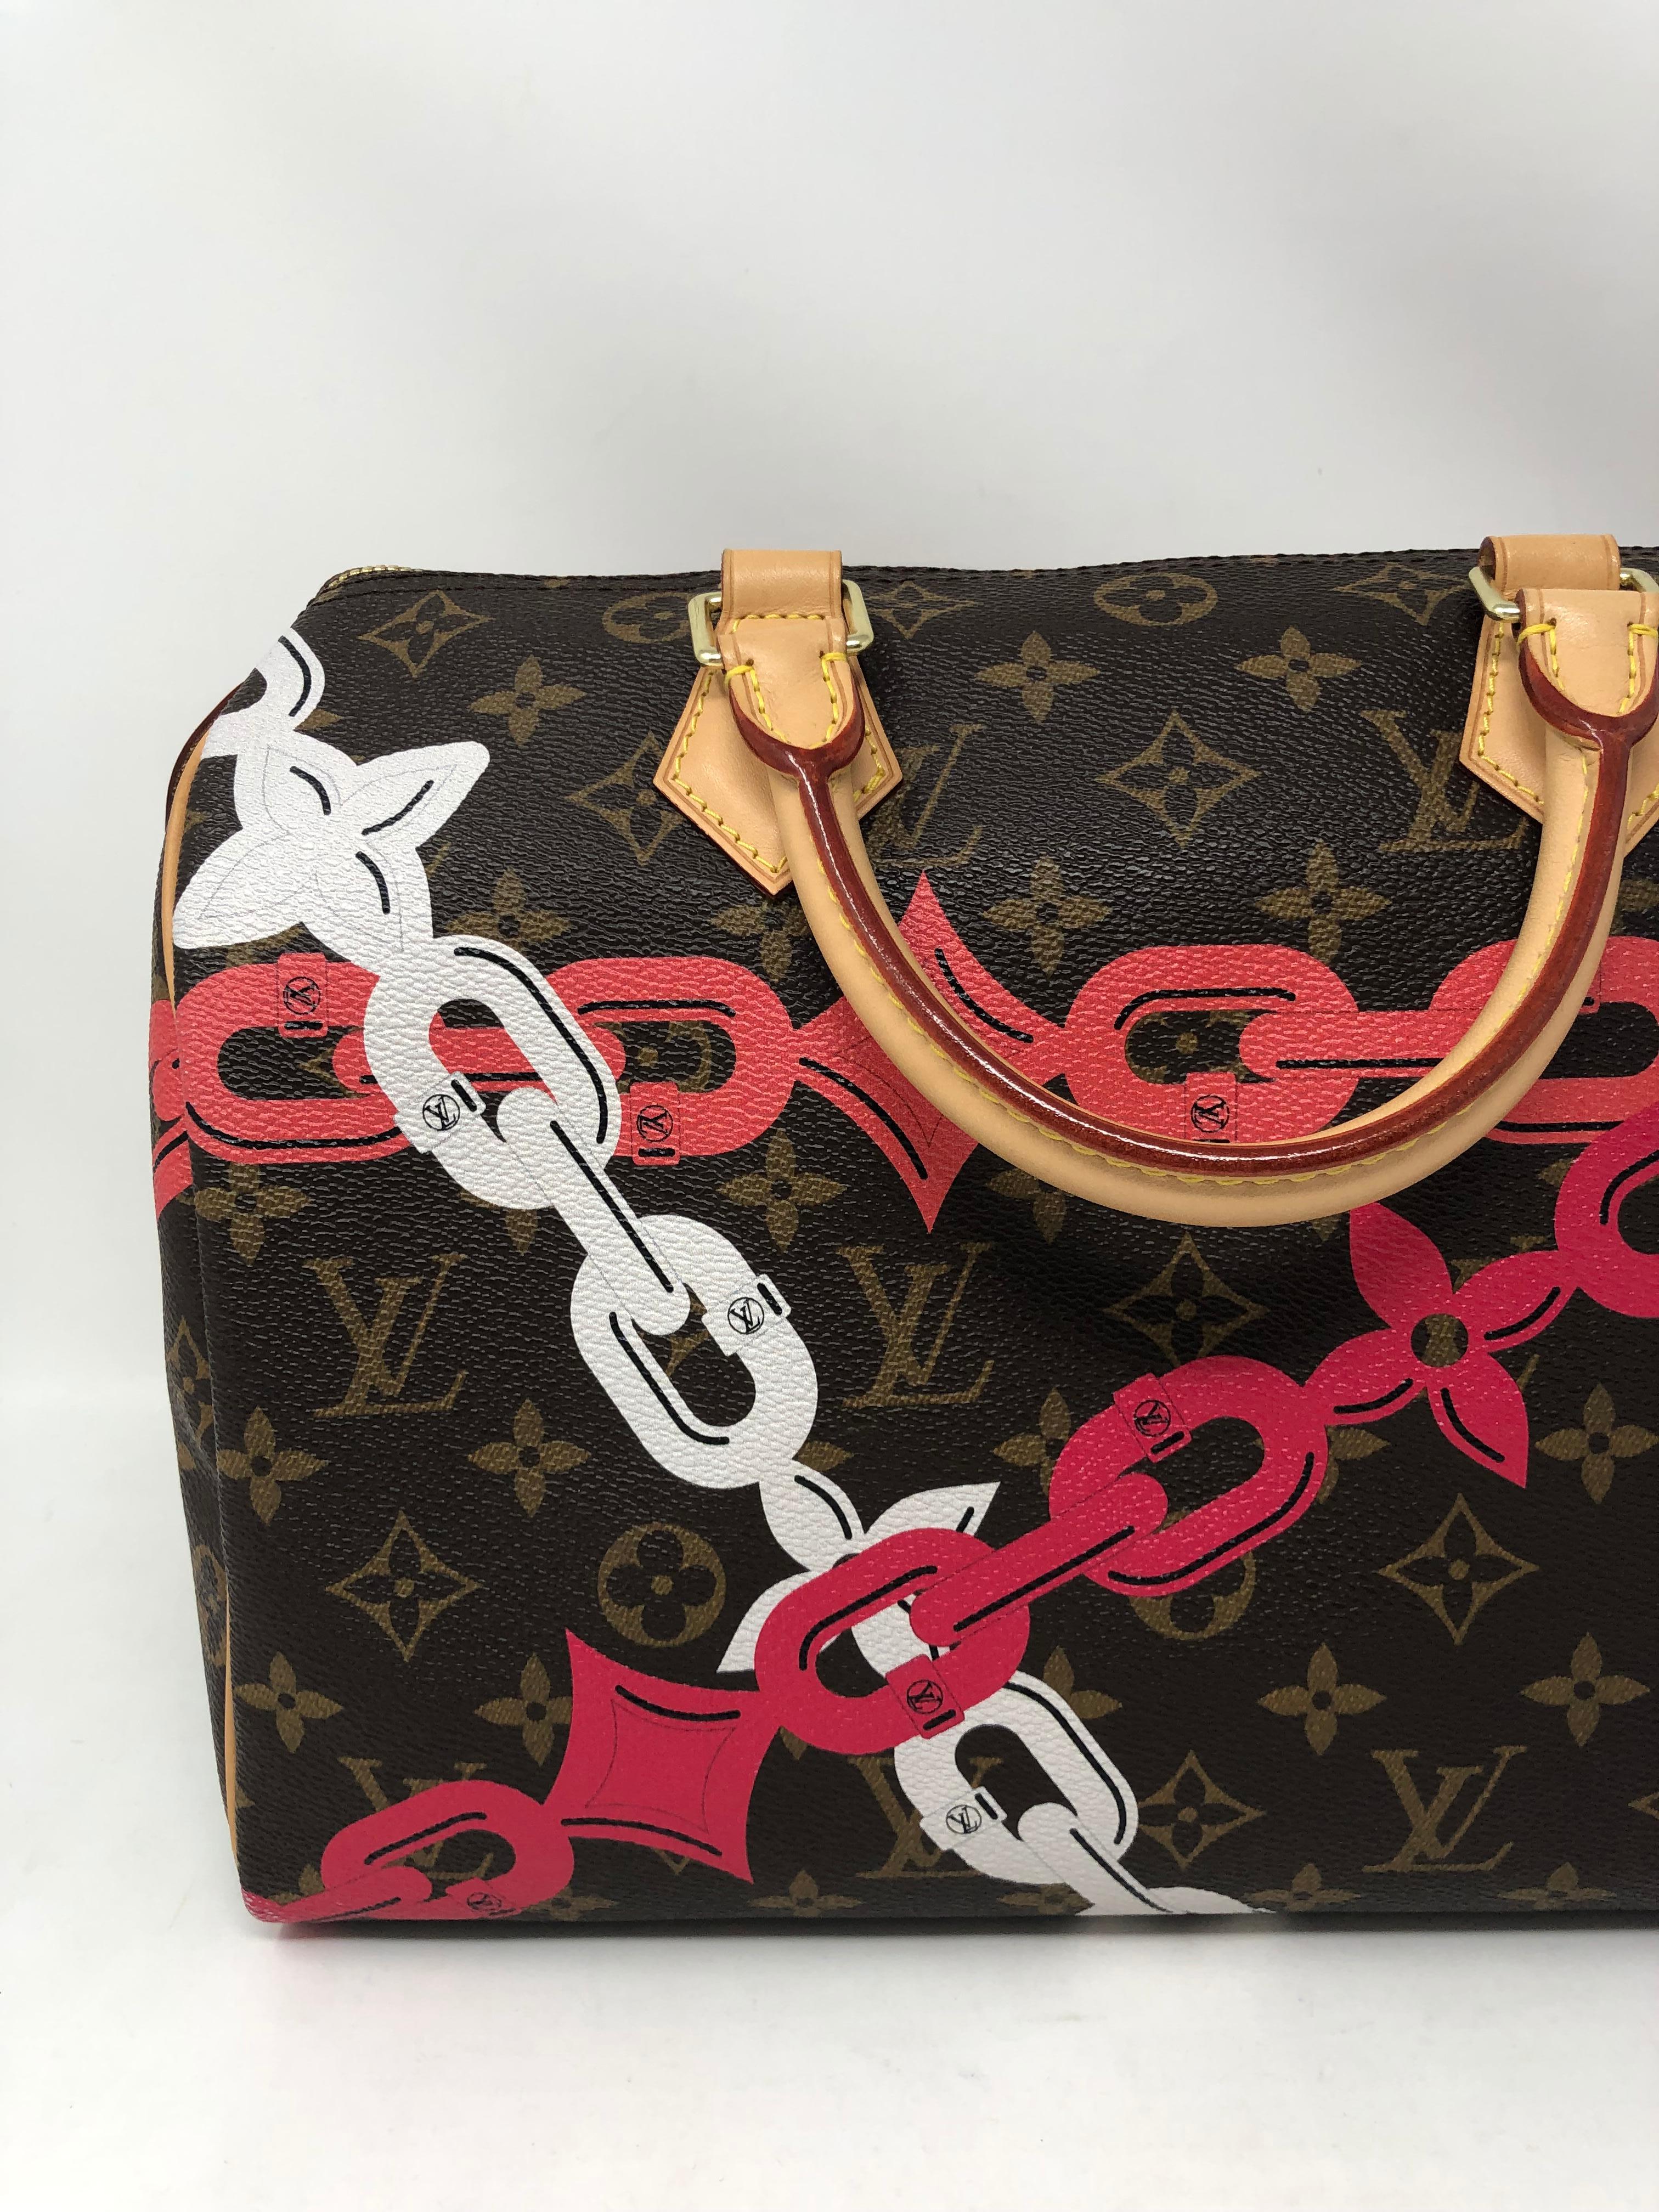 Louis Vuitton Limited Edition Monogram Canvas Chain Flower Speedy 30. Pink and white chain print on LV classic monogram. Stunning combination in this limited bag by LV. Like new condition on handles and exterior of bag. Worn only a few times.  From